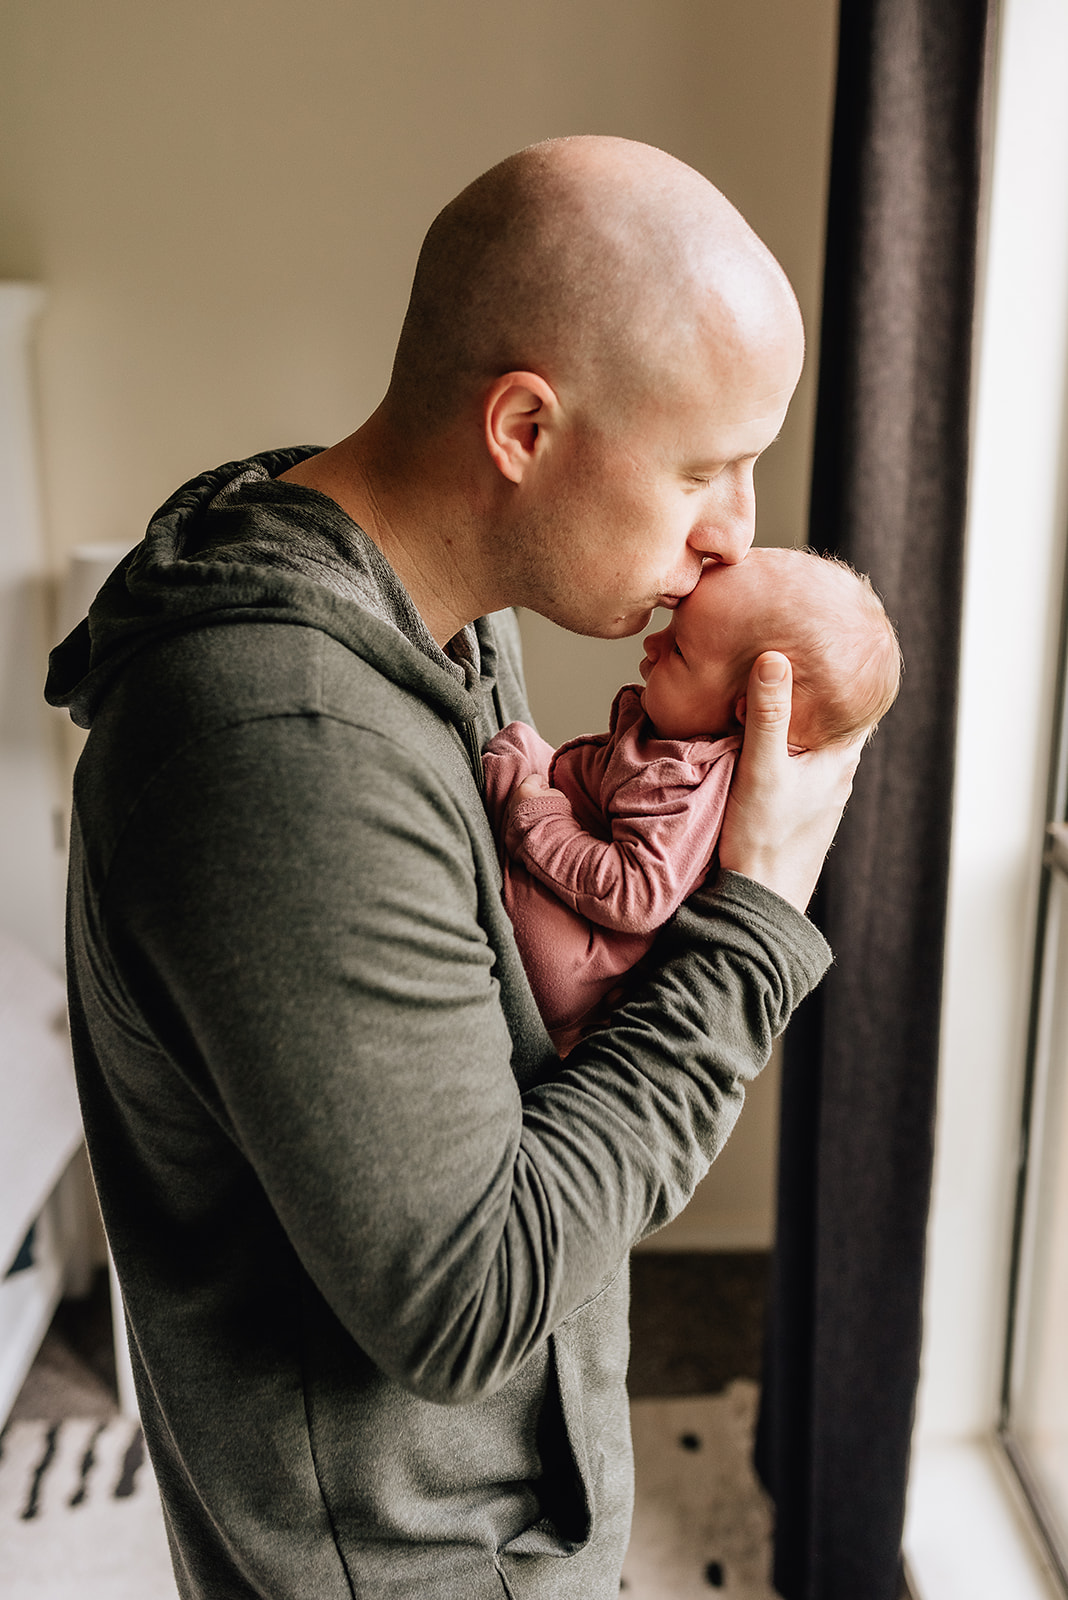 A father stands in front of a window and kisses the forehead of his newborn daughter